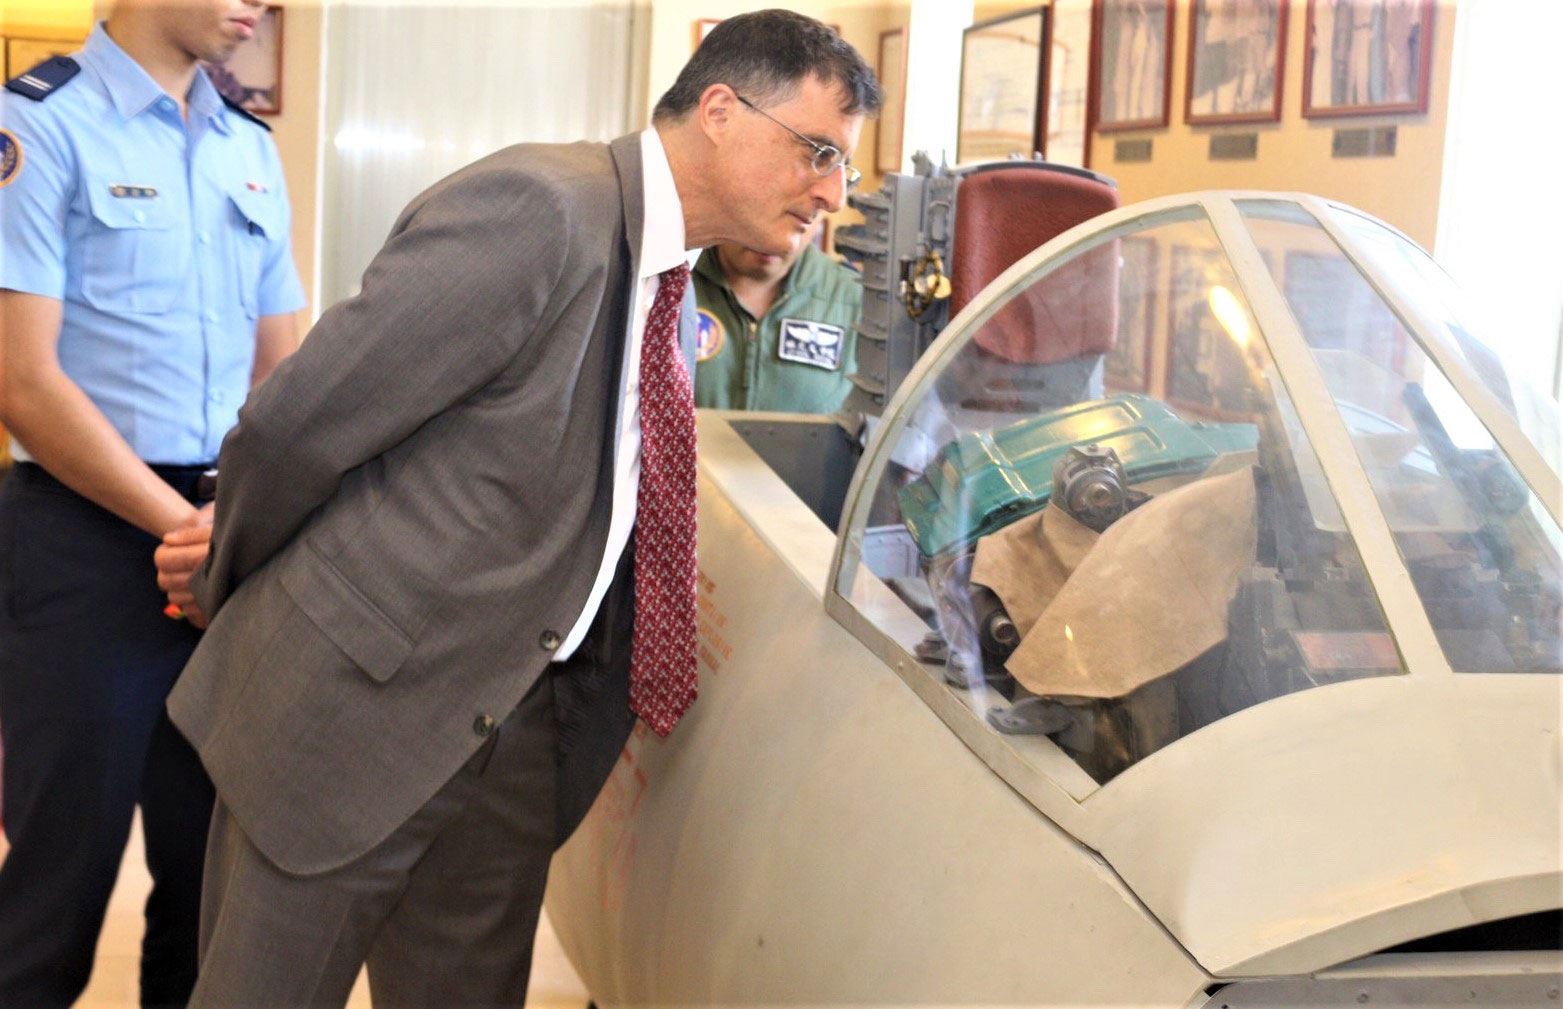 Eric Wakin looking into the cockpit of a plane on display in the American Footprint Museum